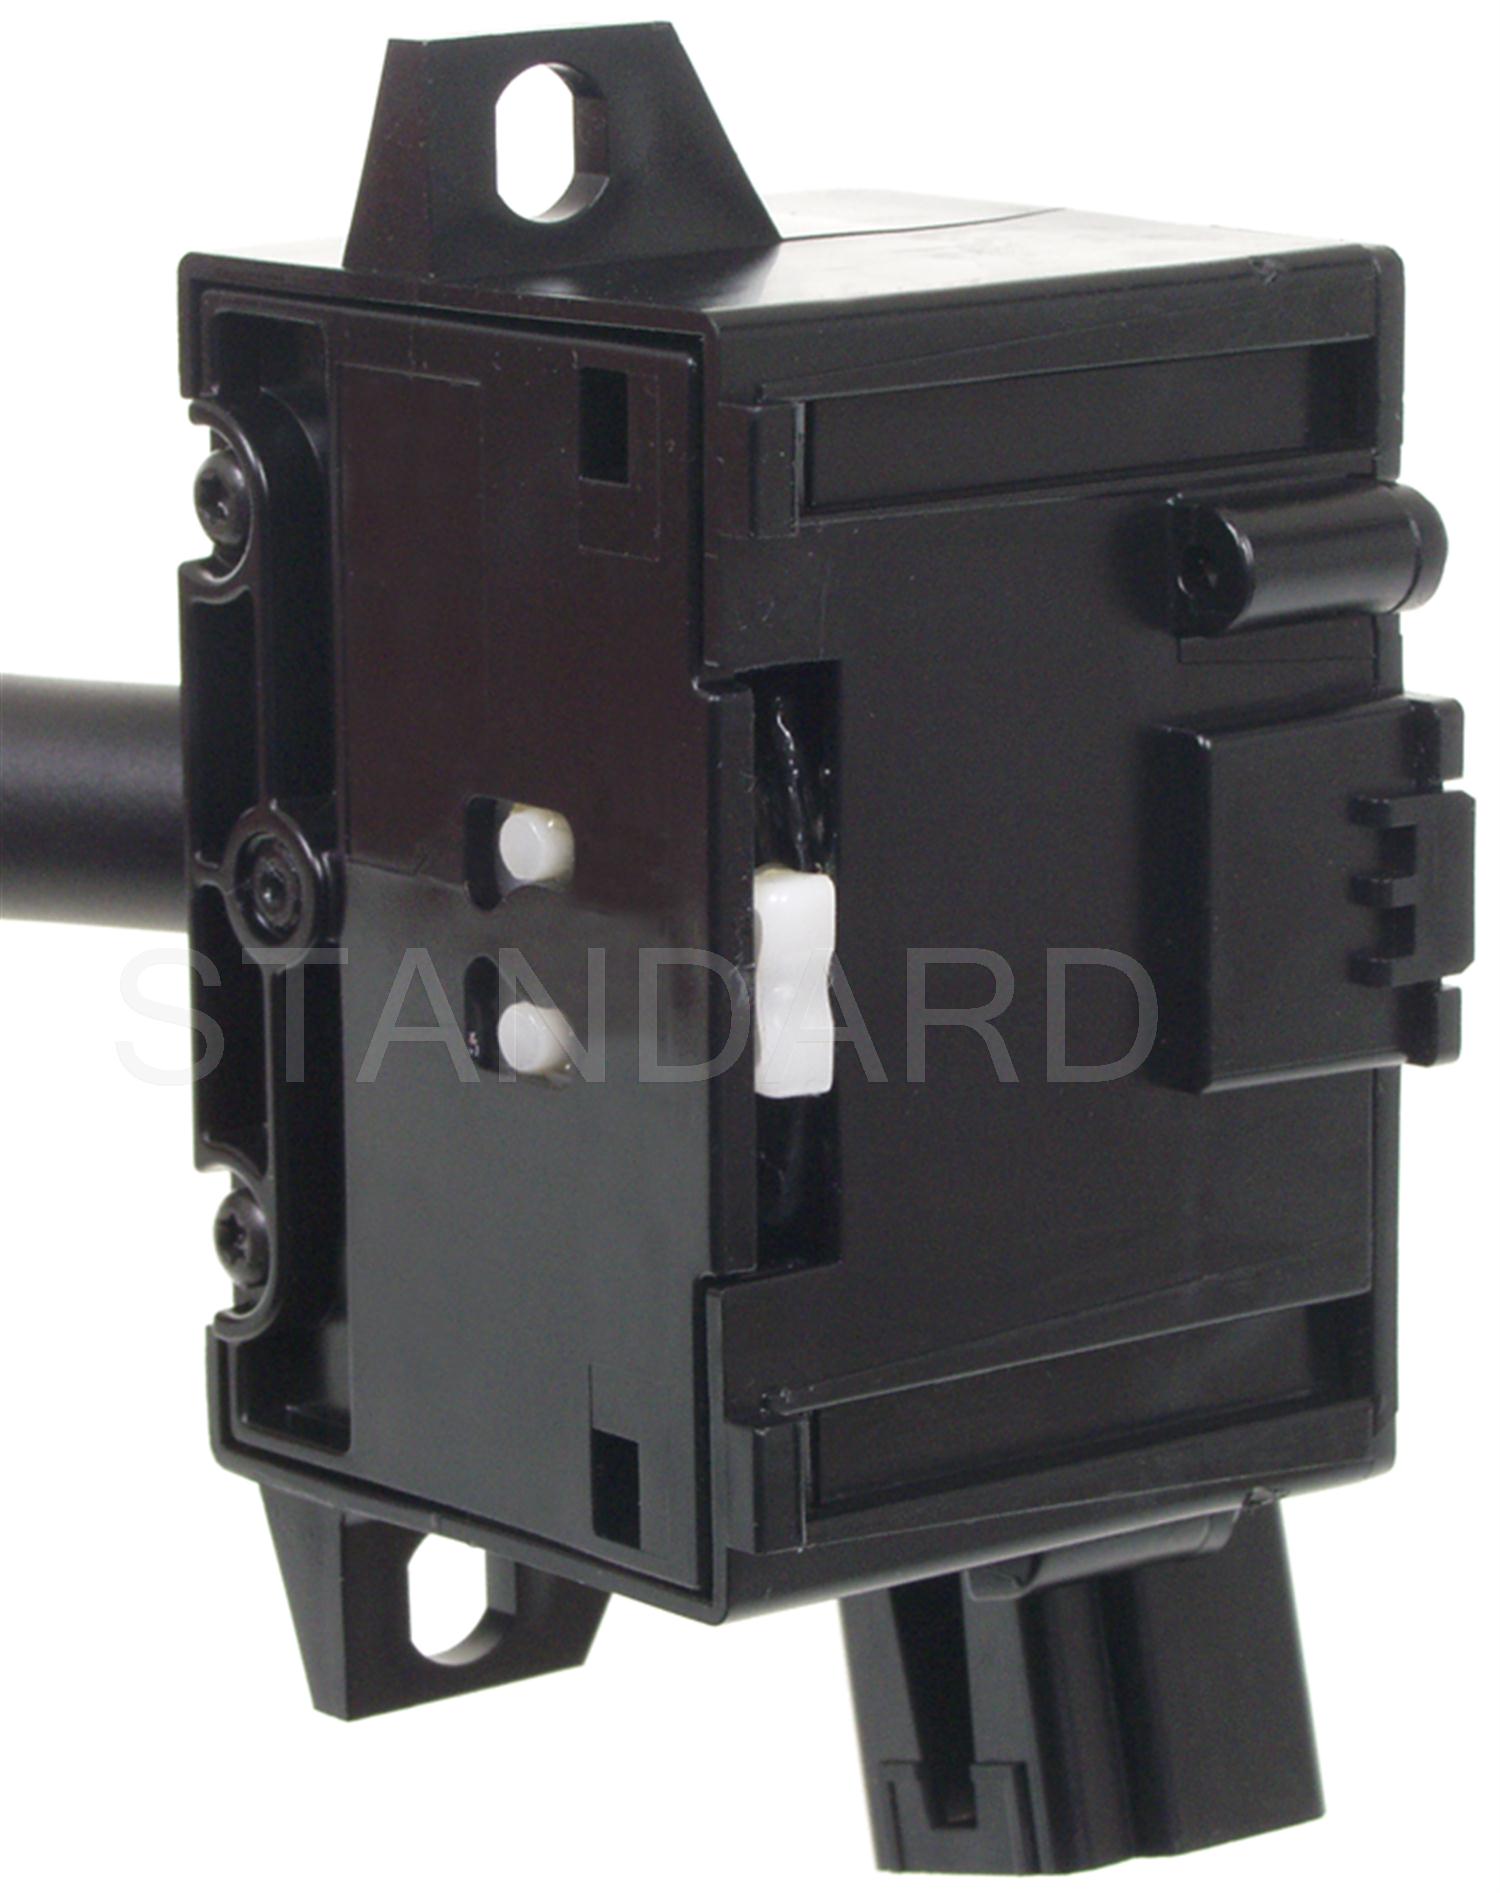 Picture of Standard Motor Products CBS1160 Standard Motor Products Cbs-1160 Combination Switch